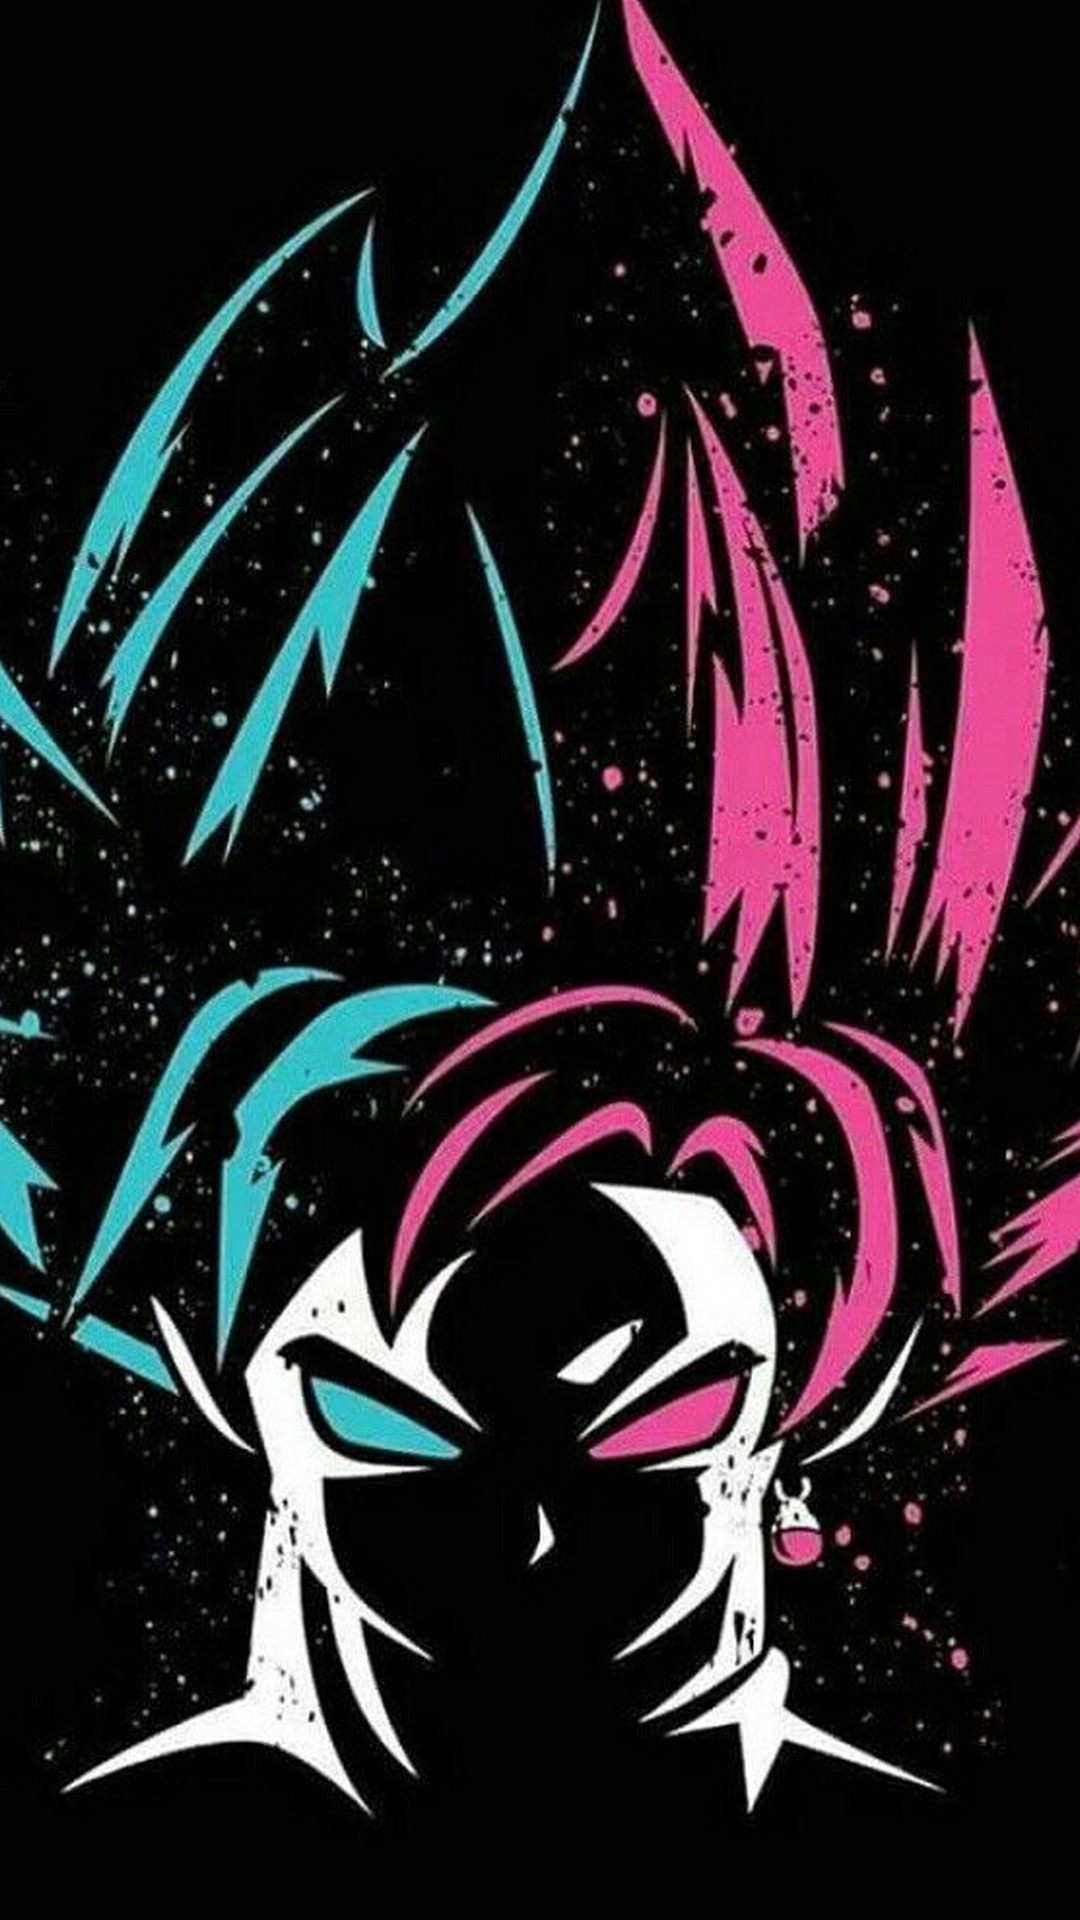 Black Goku Wallpaper iPhone with image resolution 1080x1920 pixel. You can make this wallpaper for your iPhone 5, 6, 7, 8, X backgrounds, Mobile Screensaver, or iPad Lock Screen